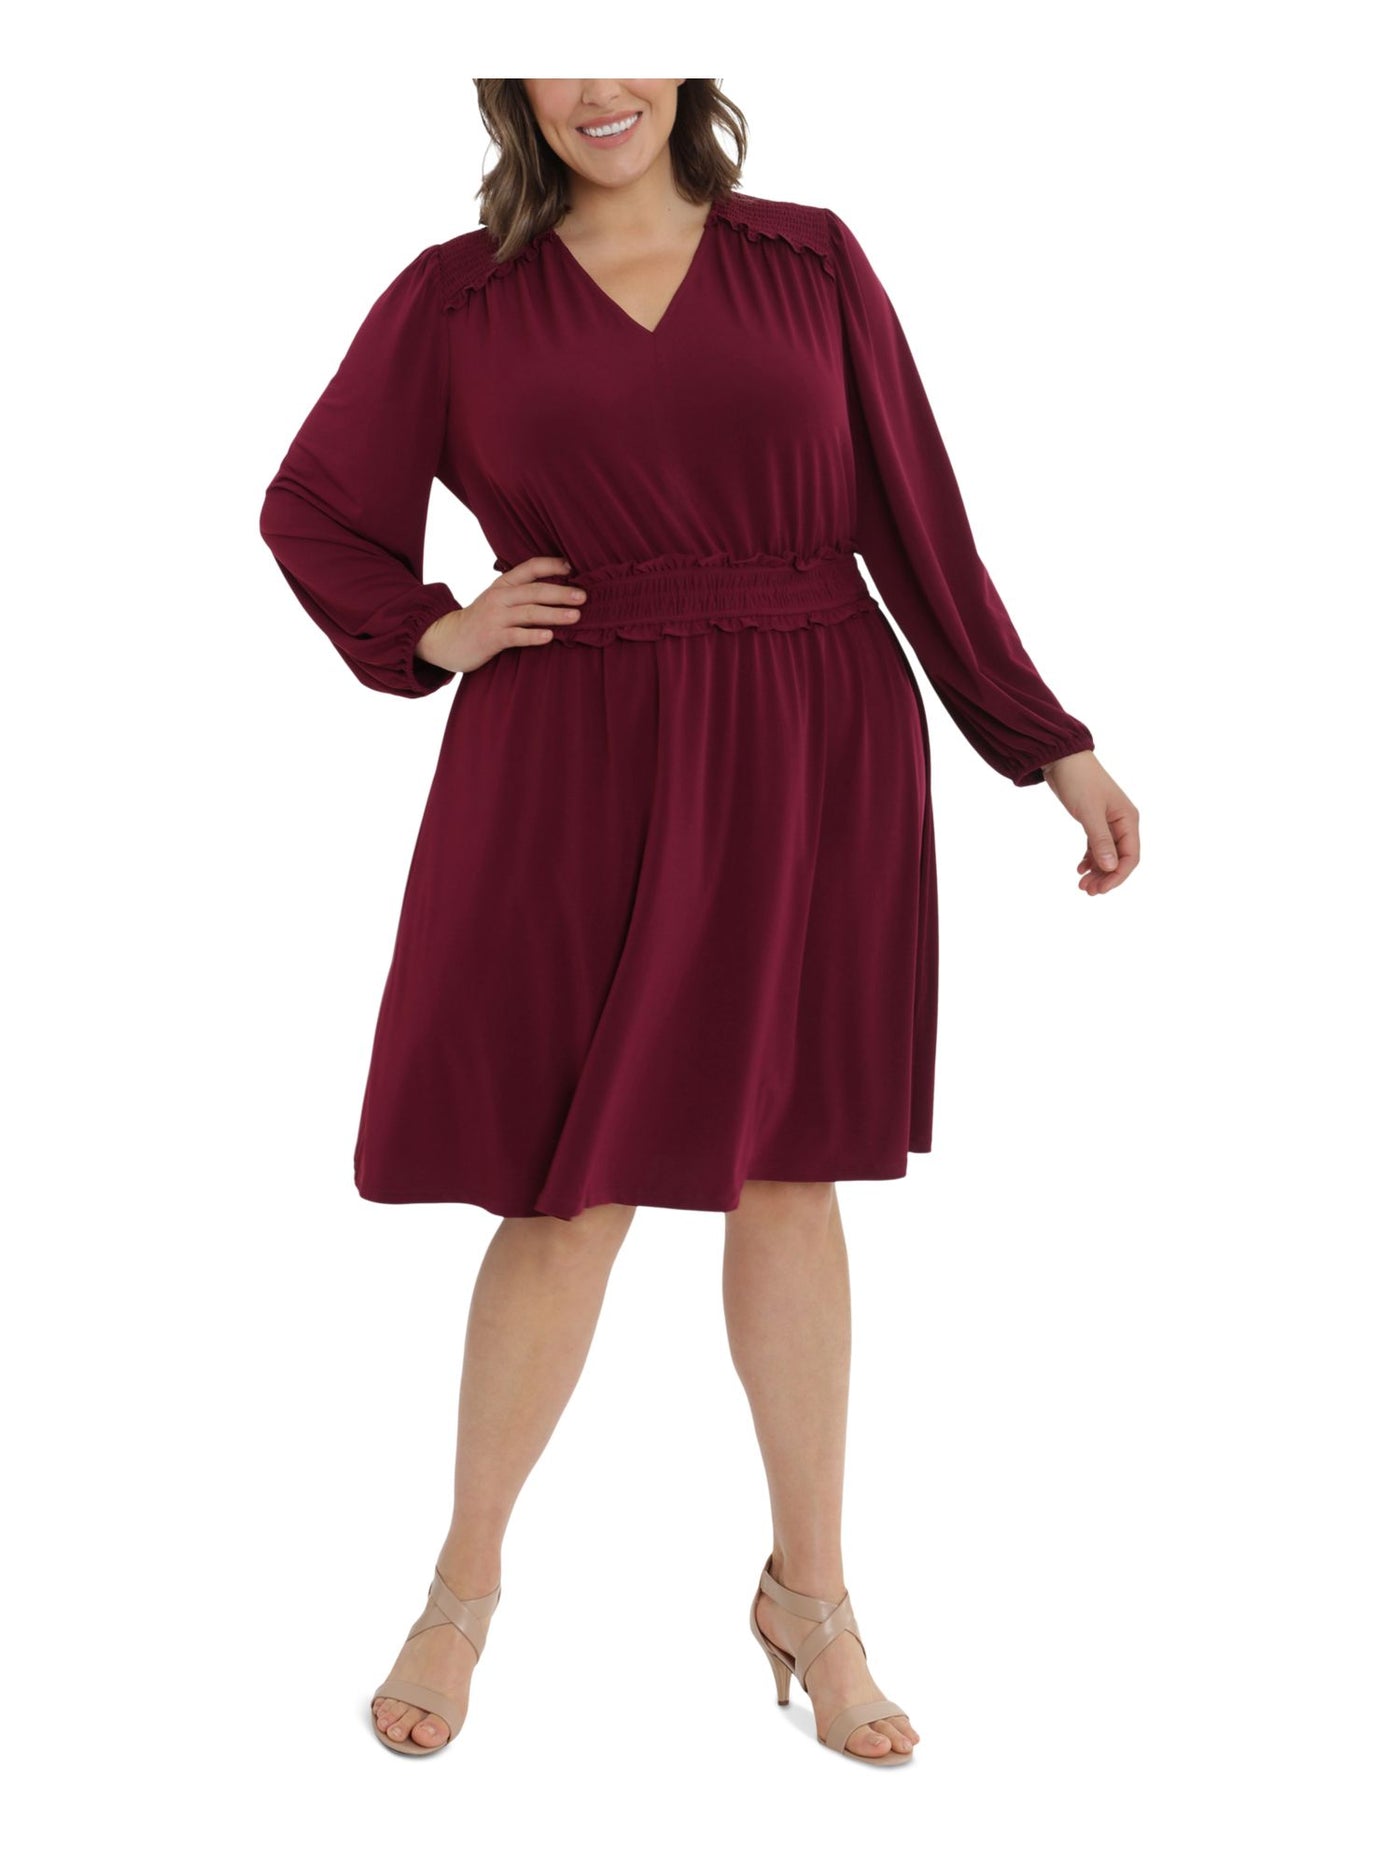 LONDON TIMES WOMAN Womens Burgundy Stretch Smocked Ruffled Unlined Pullover Long Sleeve V Neck Knee Length Wear To Work Fit + Flare Dress Plus 22W